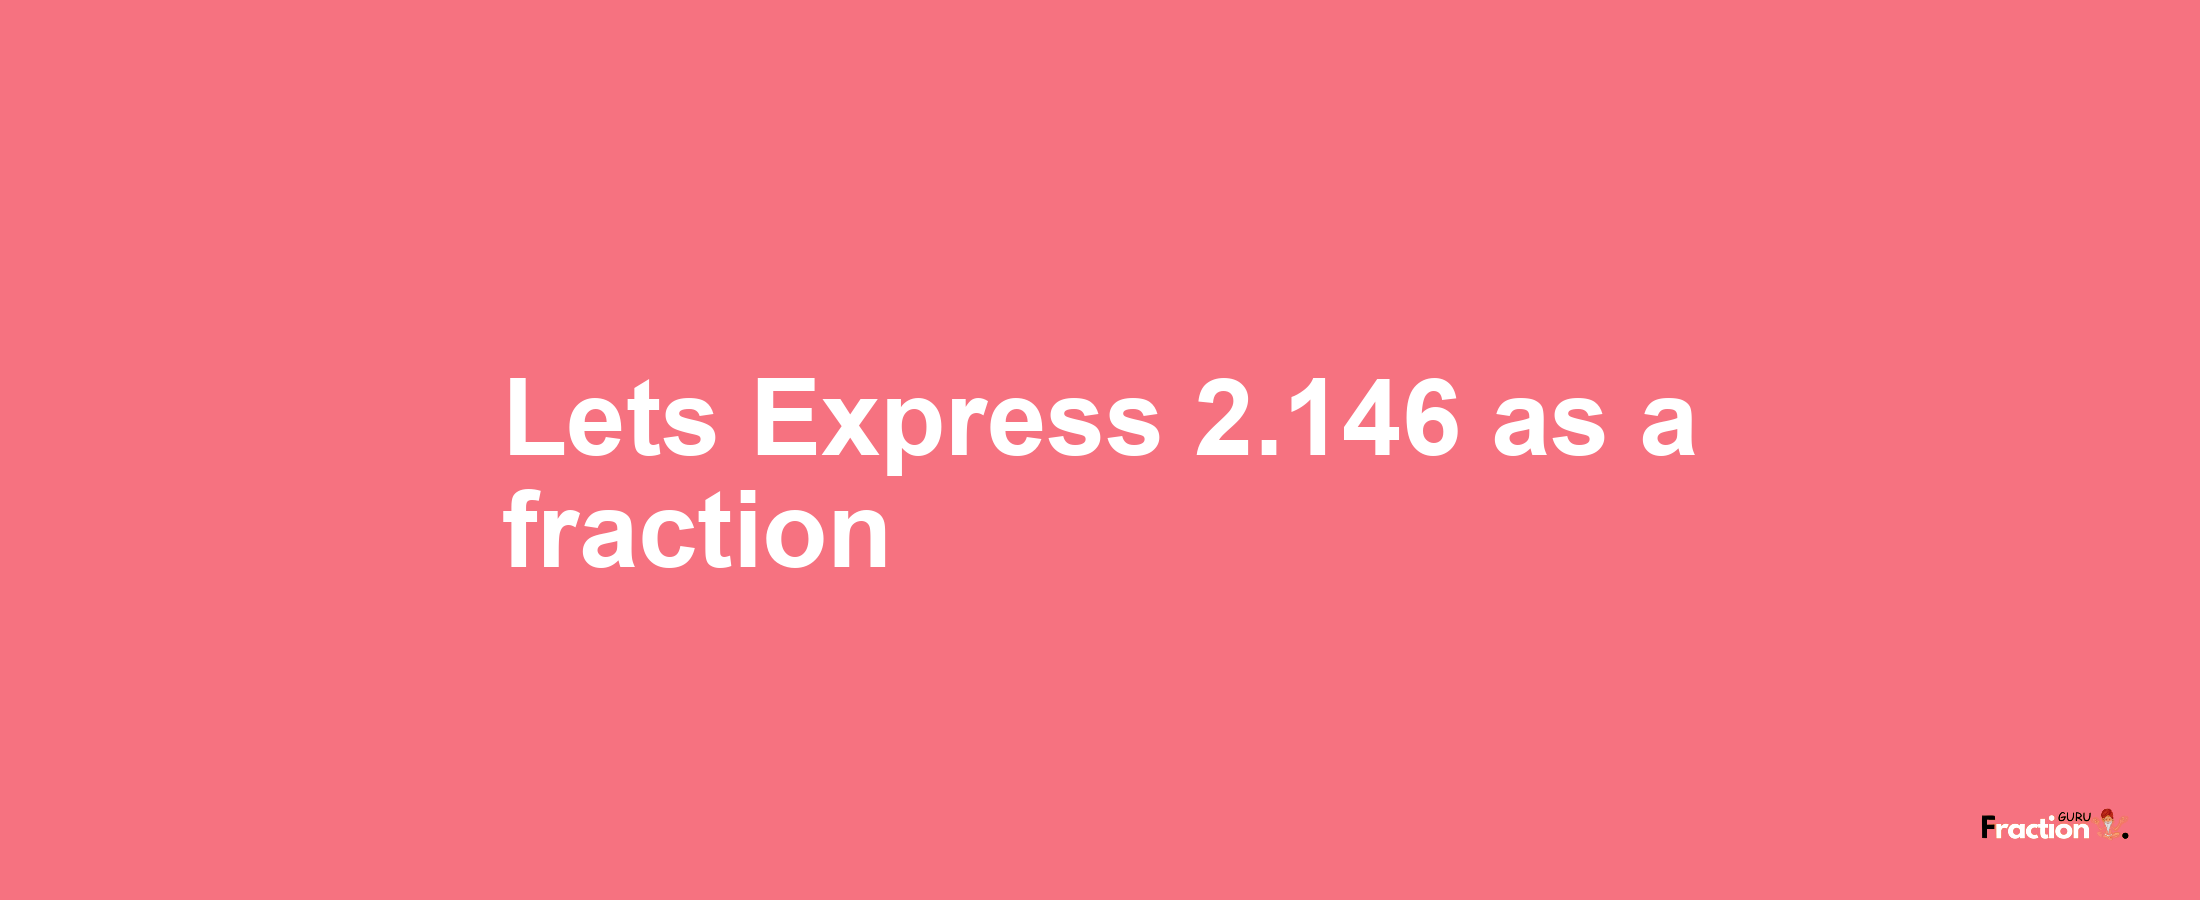 Lets Express 2.146 as afraction